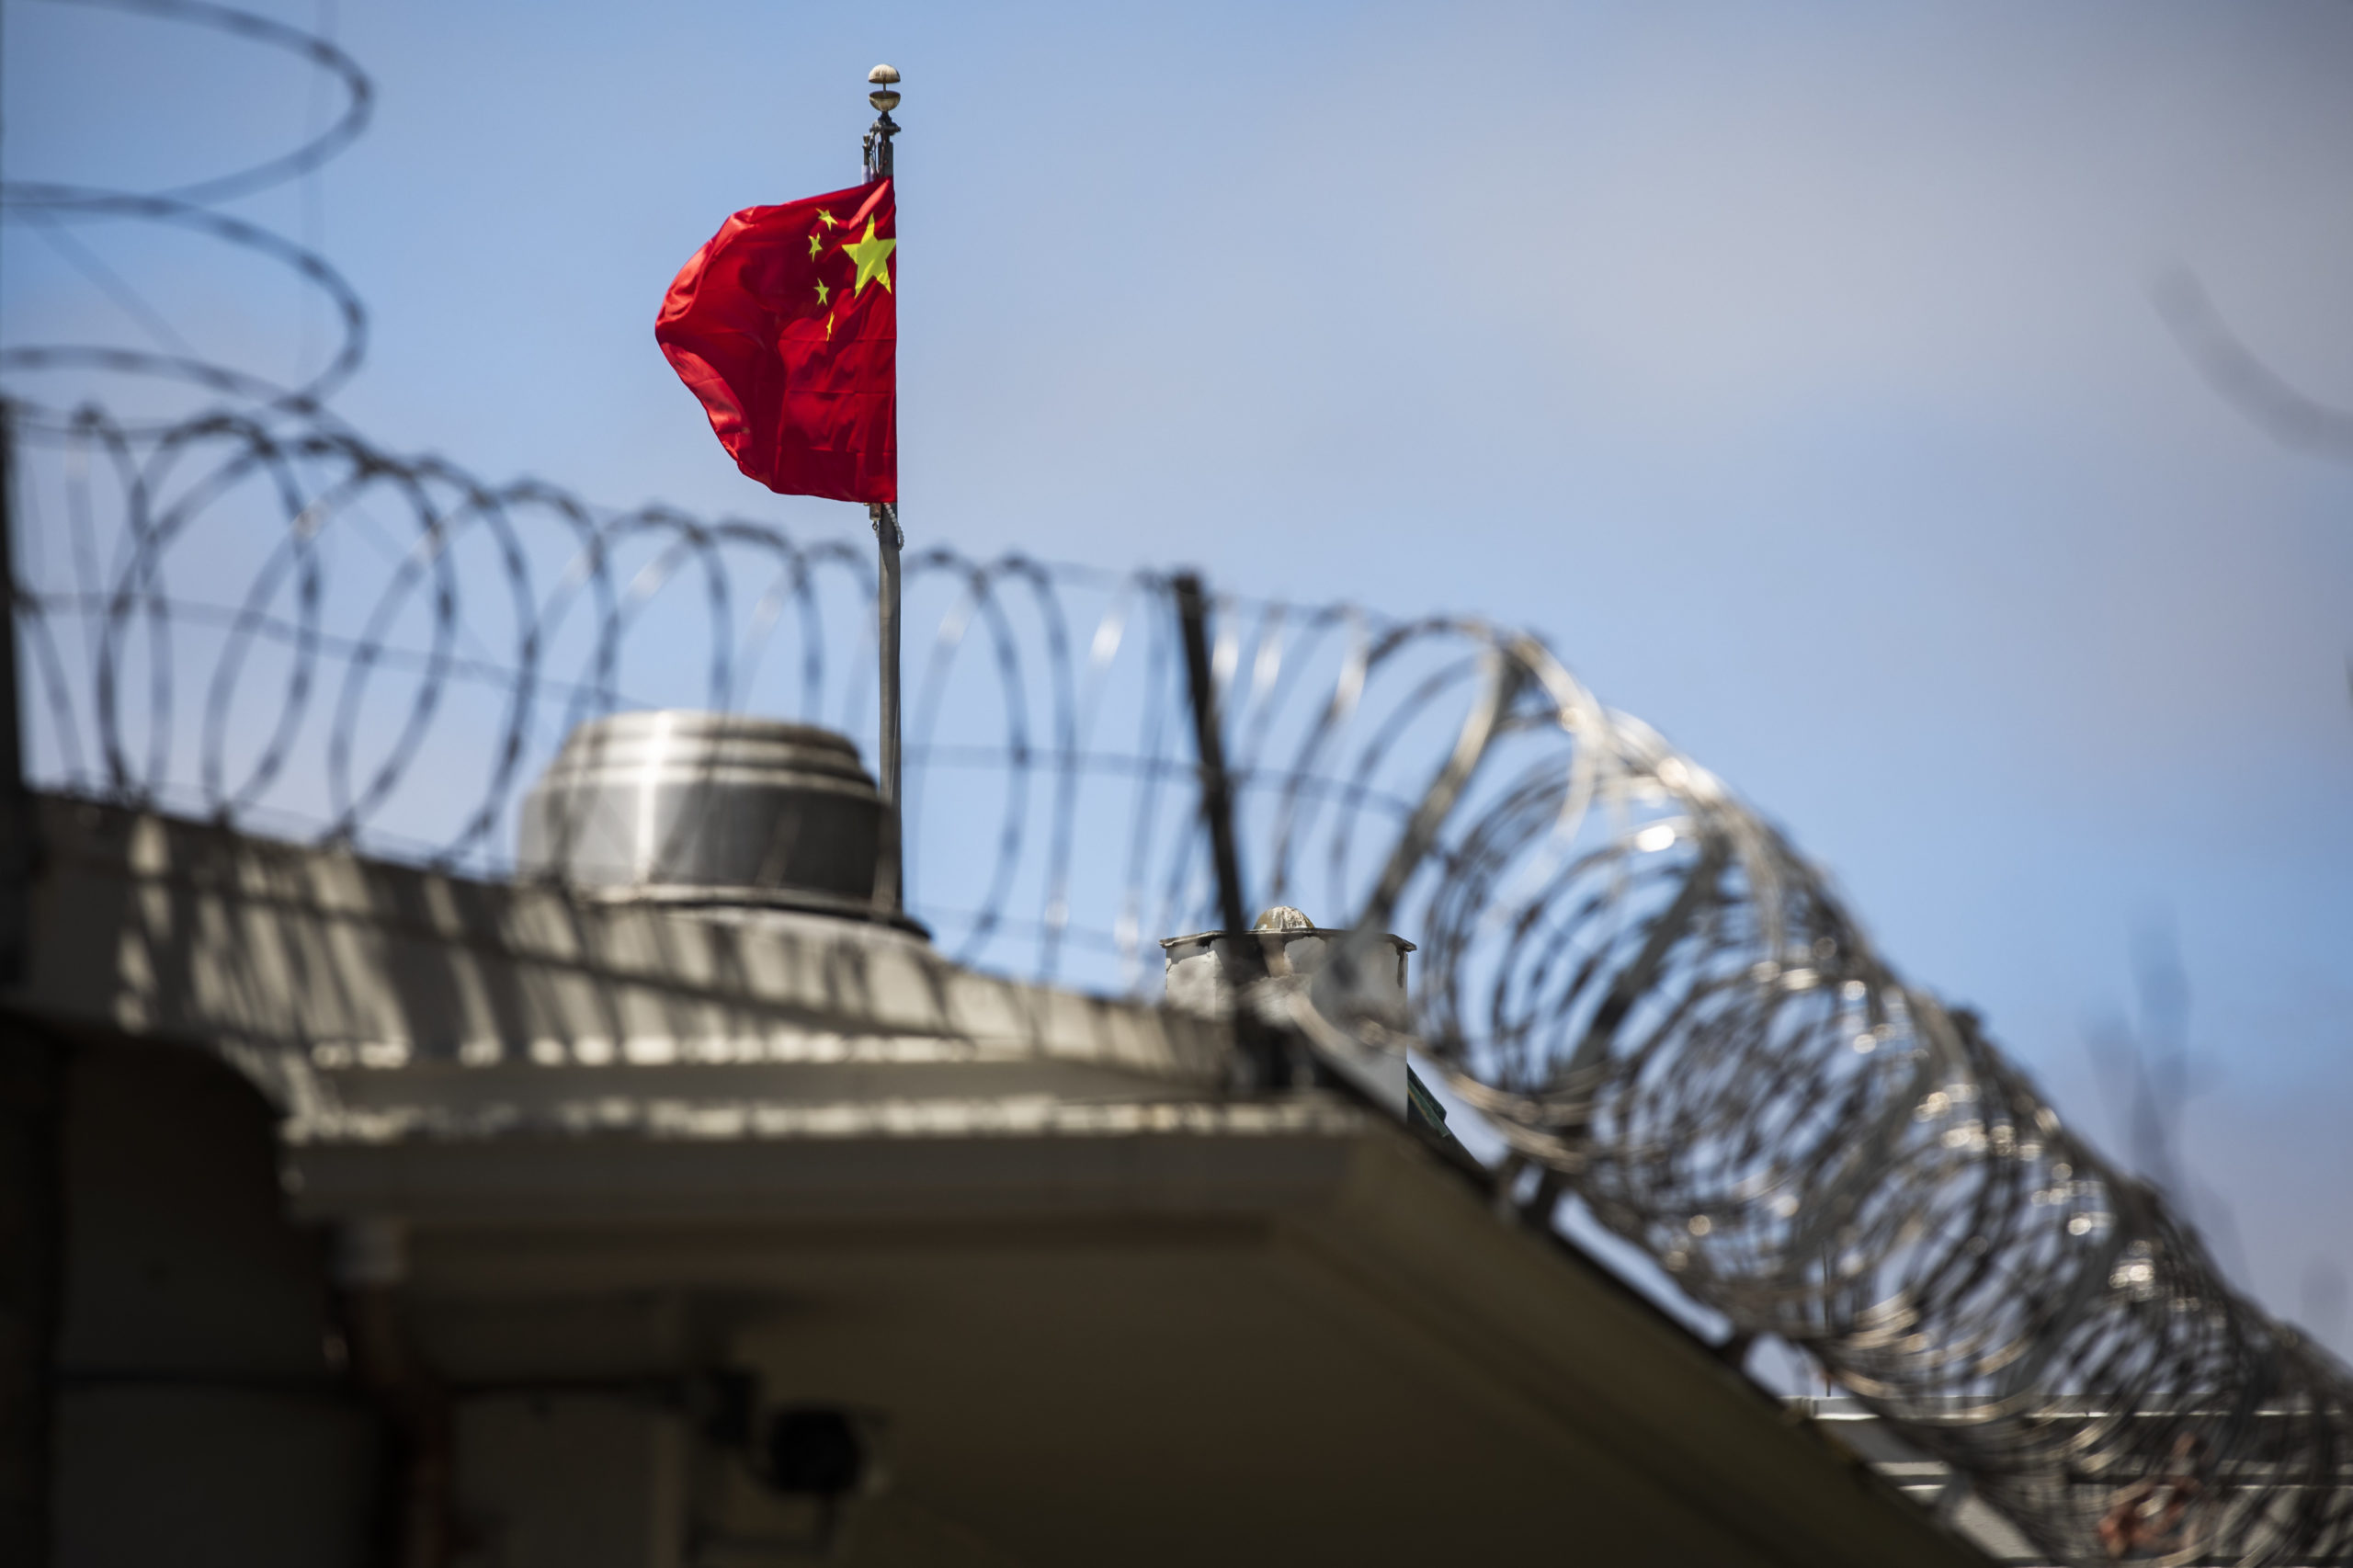 The flag of the People's Republic of China flies behind barbed wire at the Consulate General of the People's Republic of China in San Francisco, California on July 23, 2020. - The US Justice Department announced July 23, 2020 the indictments of four Chinese researchers it said lied about their ties to the People's Liberation Army, with one escaping arrest by taking refuge in the country's San Francisco consulate. (Photo by Philip Pacheco / AFP) (Photo by PHILIP PACHECO/AFP via Getty Images)